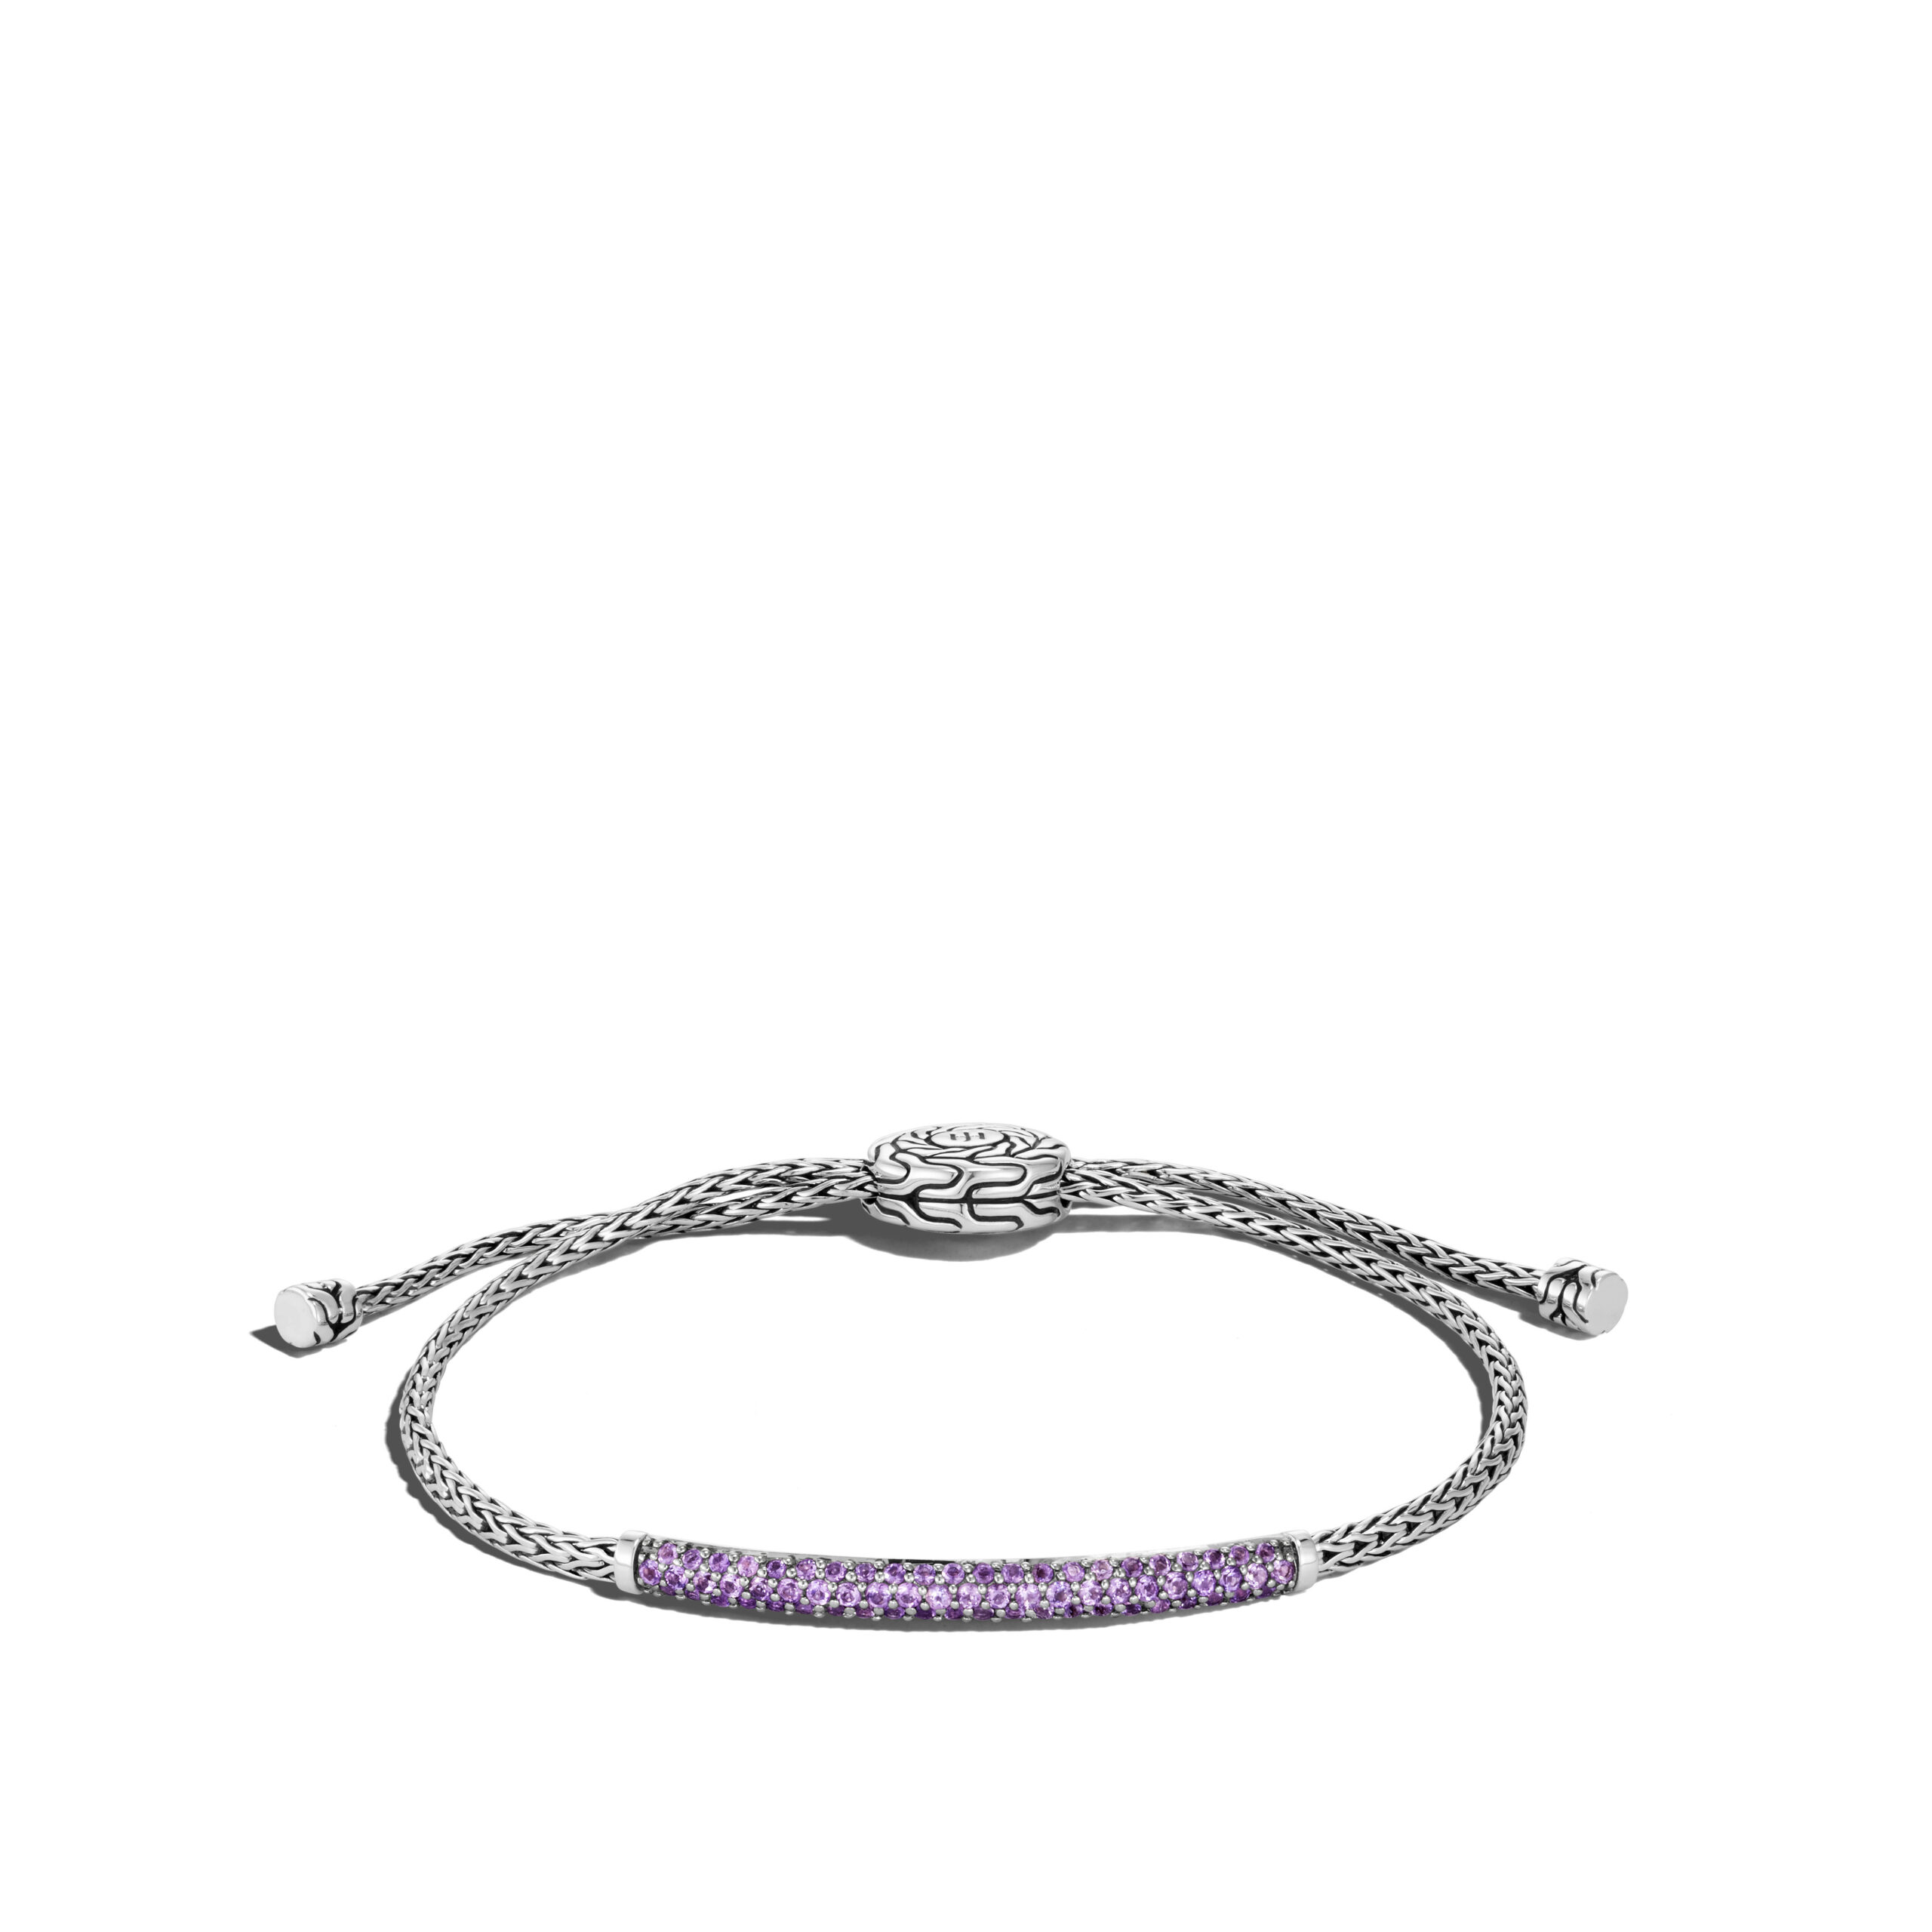 This bracelet by John Hardy is crafted from sterling silver and features amethyst.